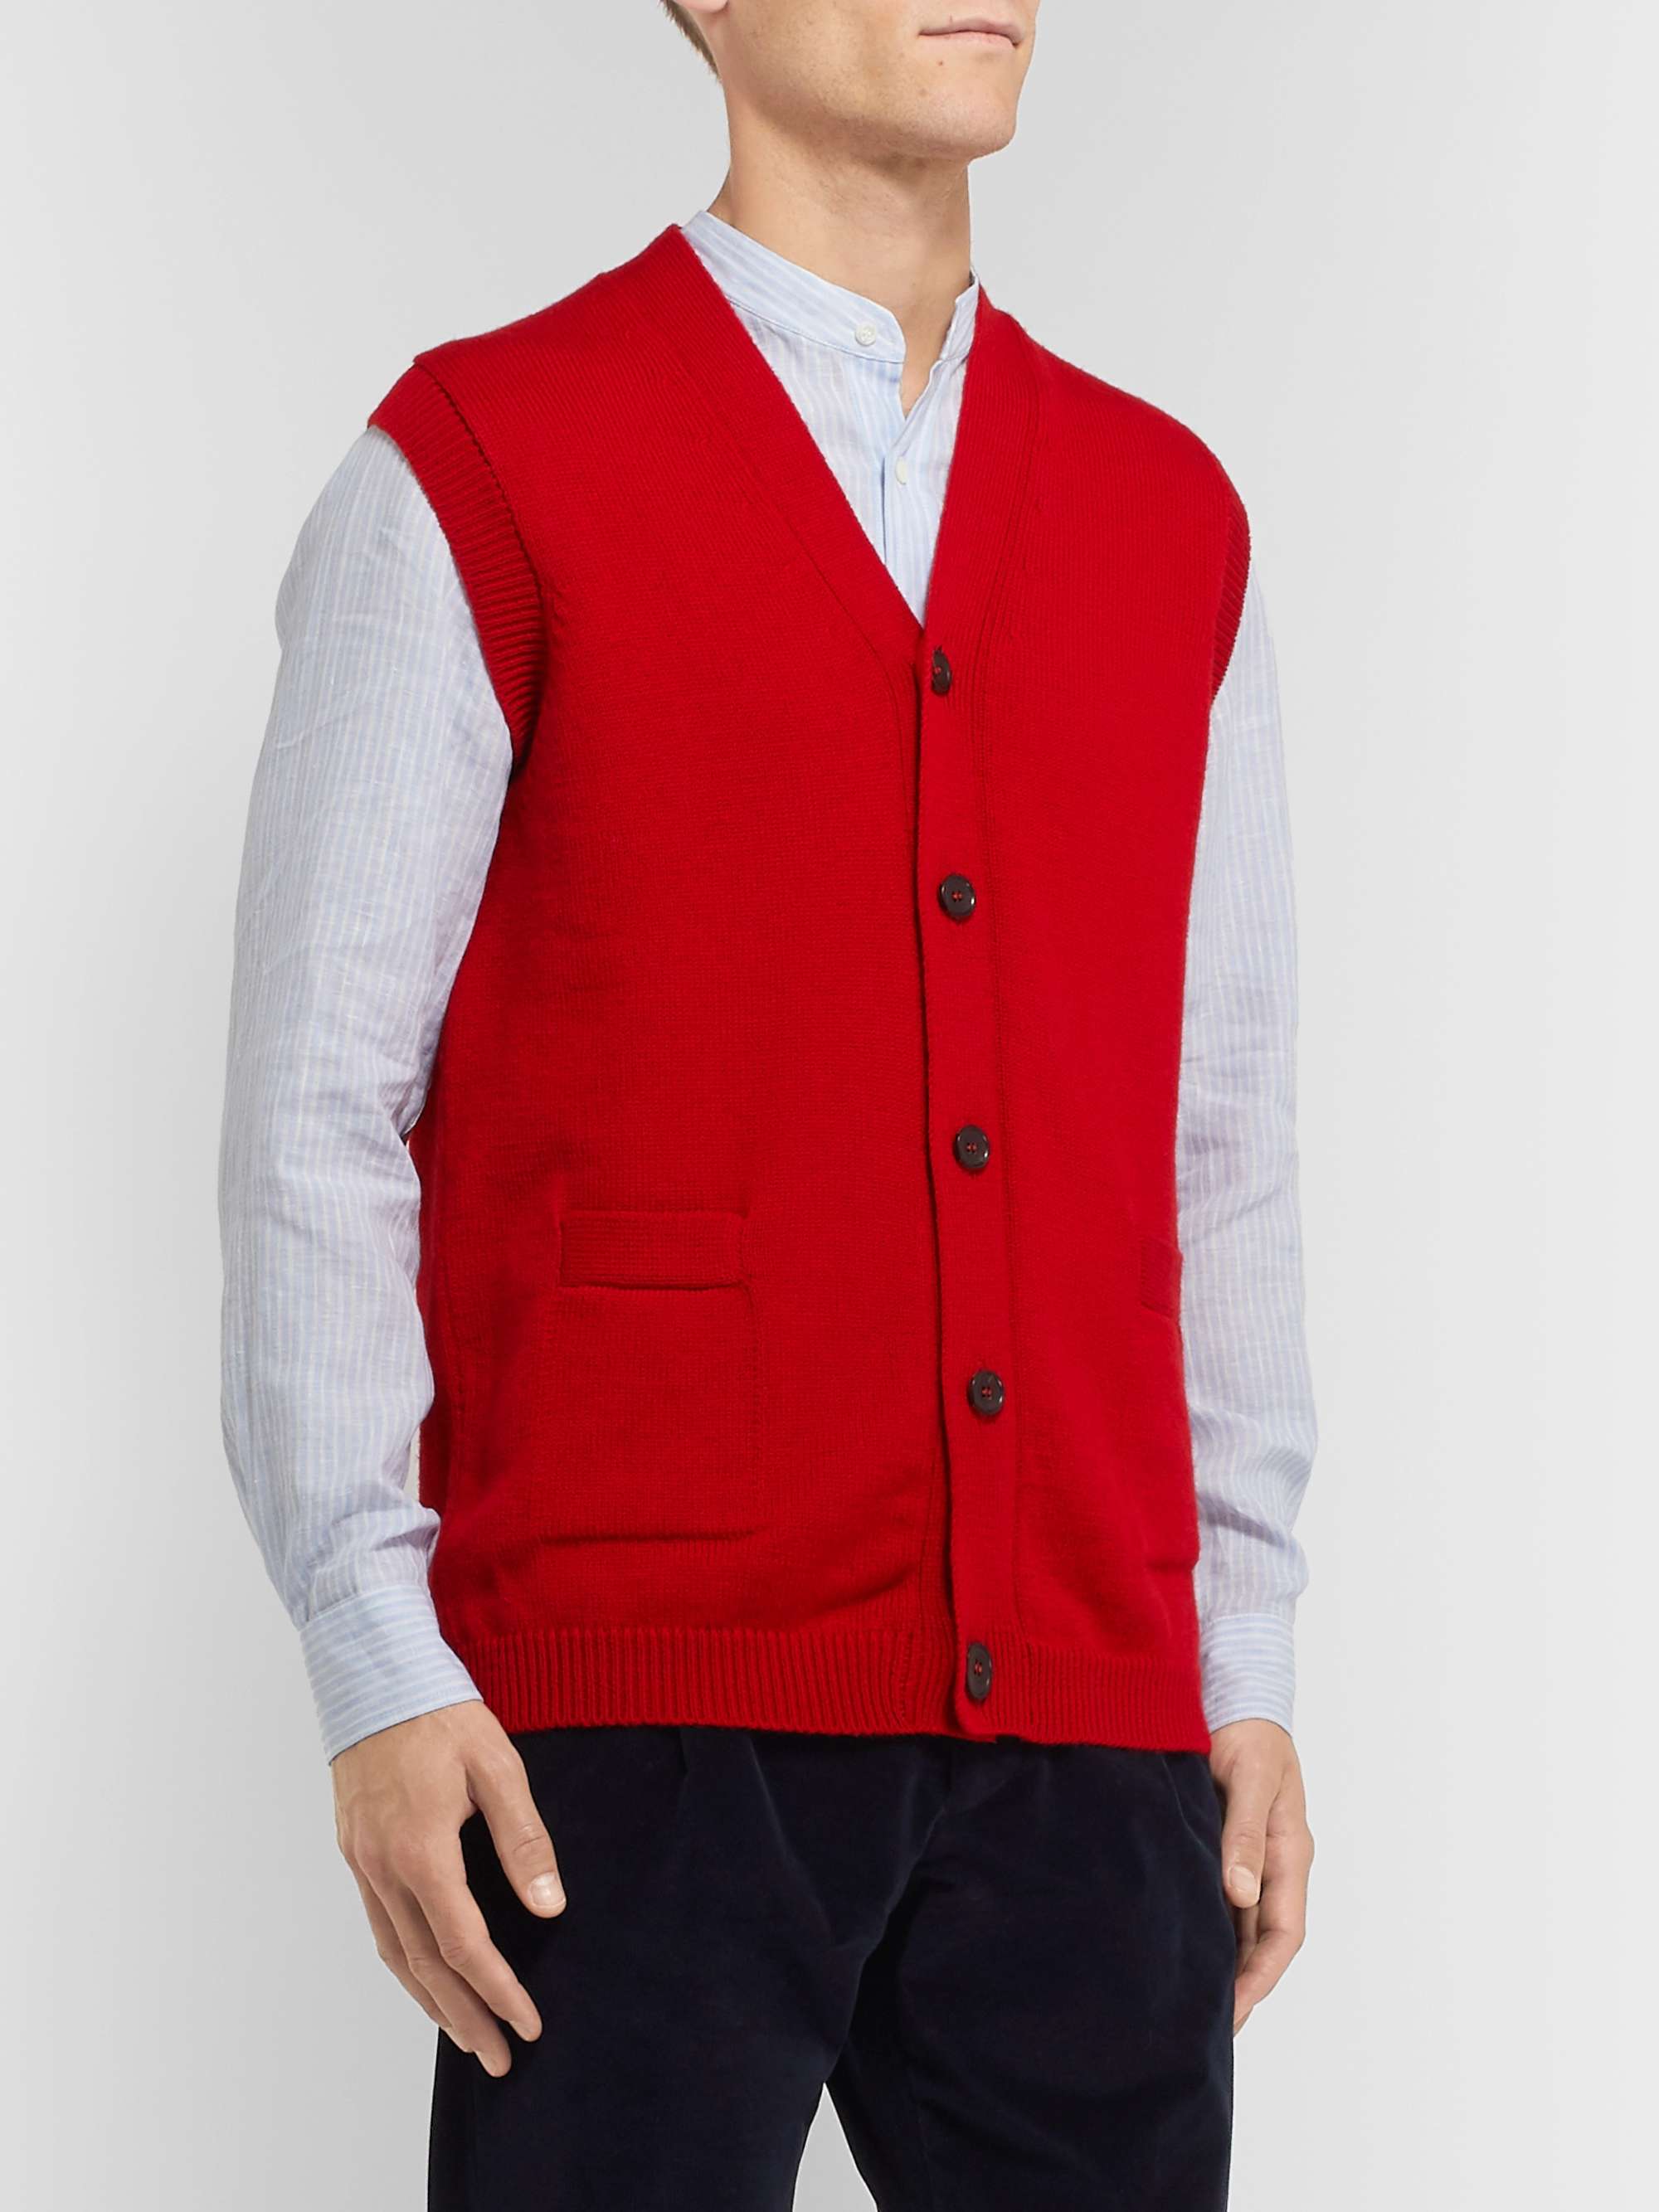 CONNOLLY + Goodwood Wool and Cashmere-Blend Sweater Vest